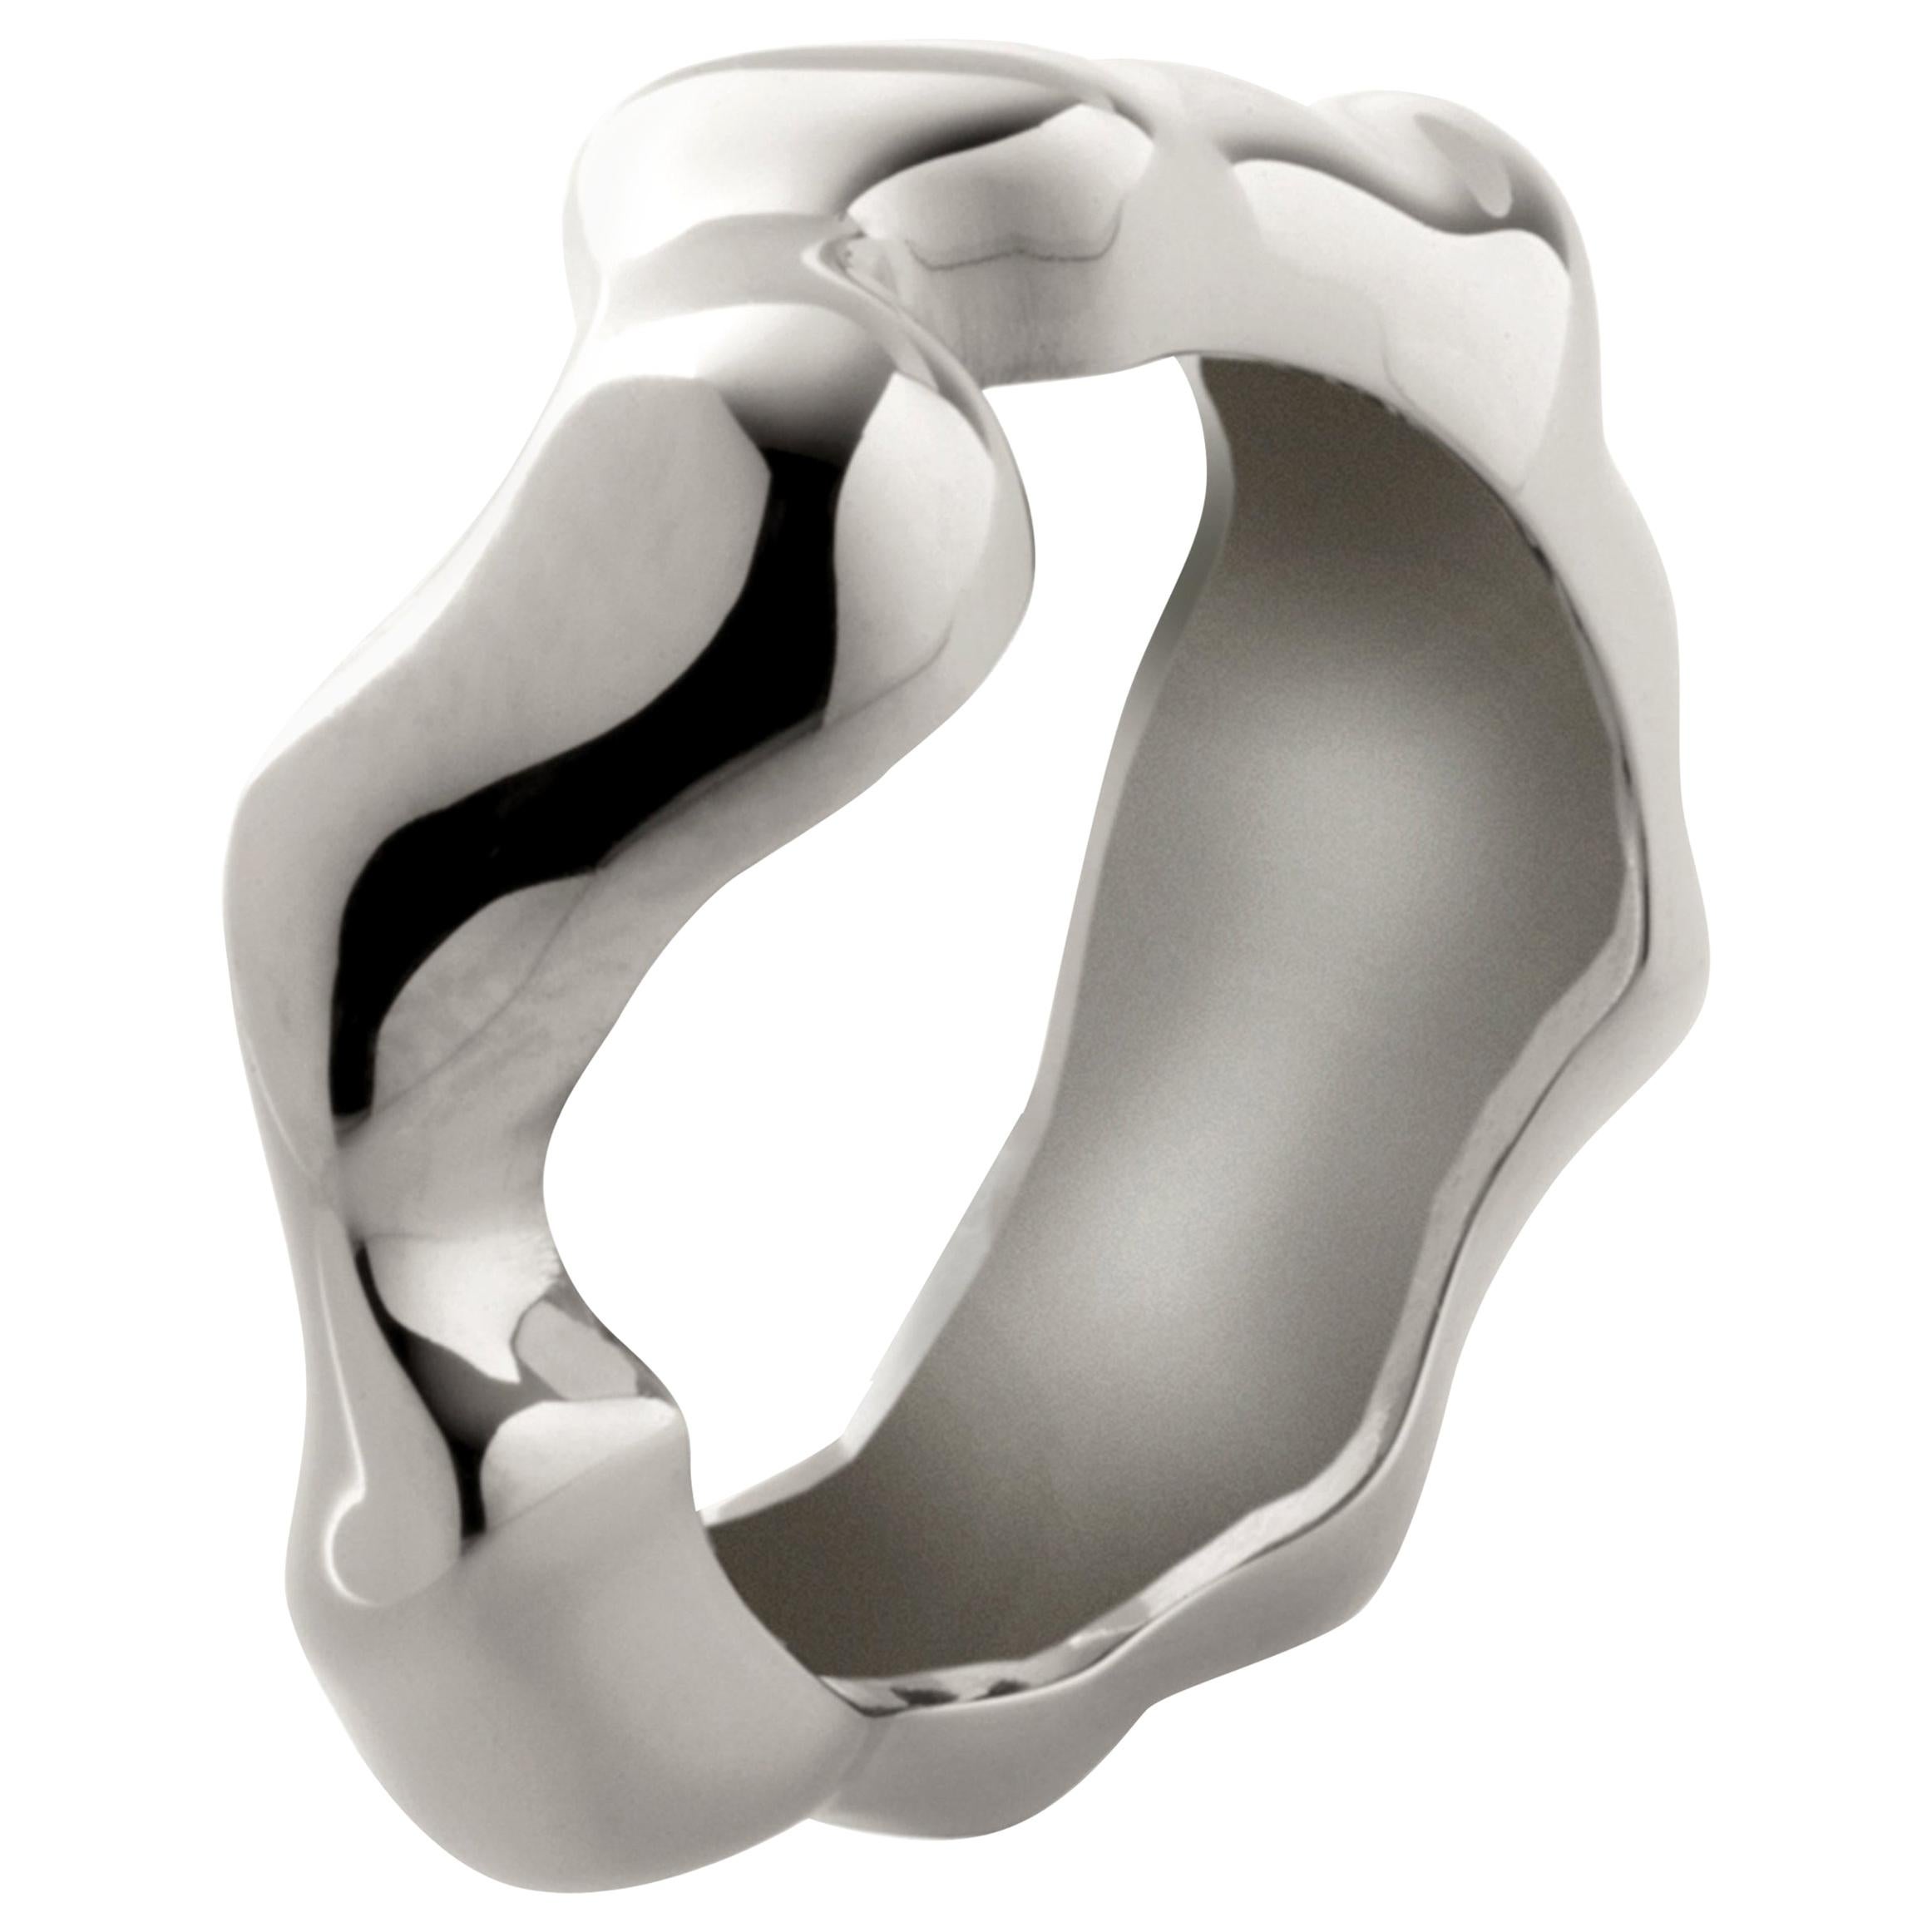 Nathalie Jean Contemporary Sterling Silver Fashion Band Sculpture Ring im Angebot